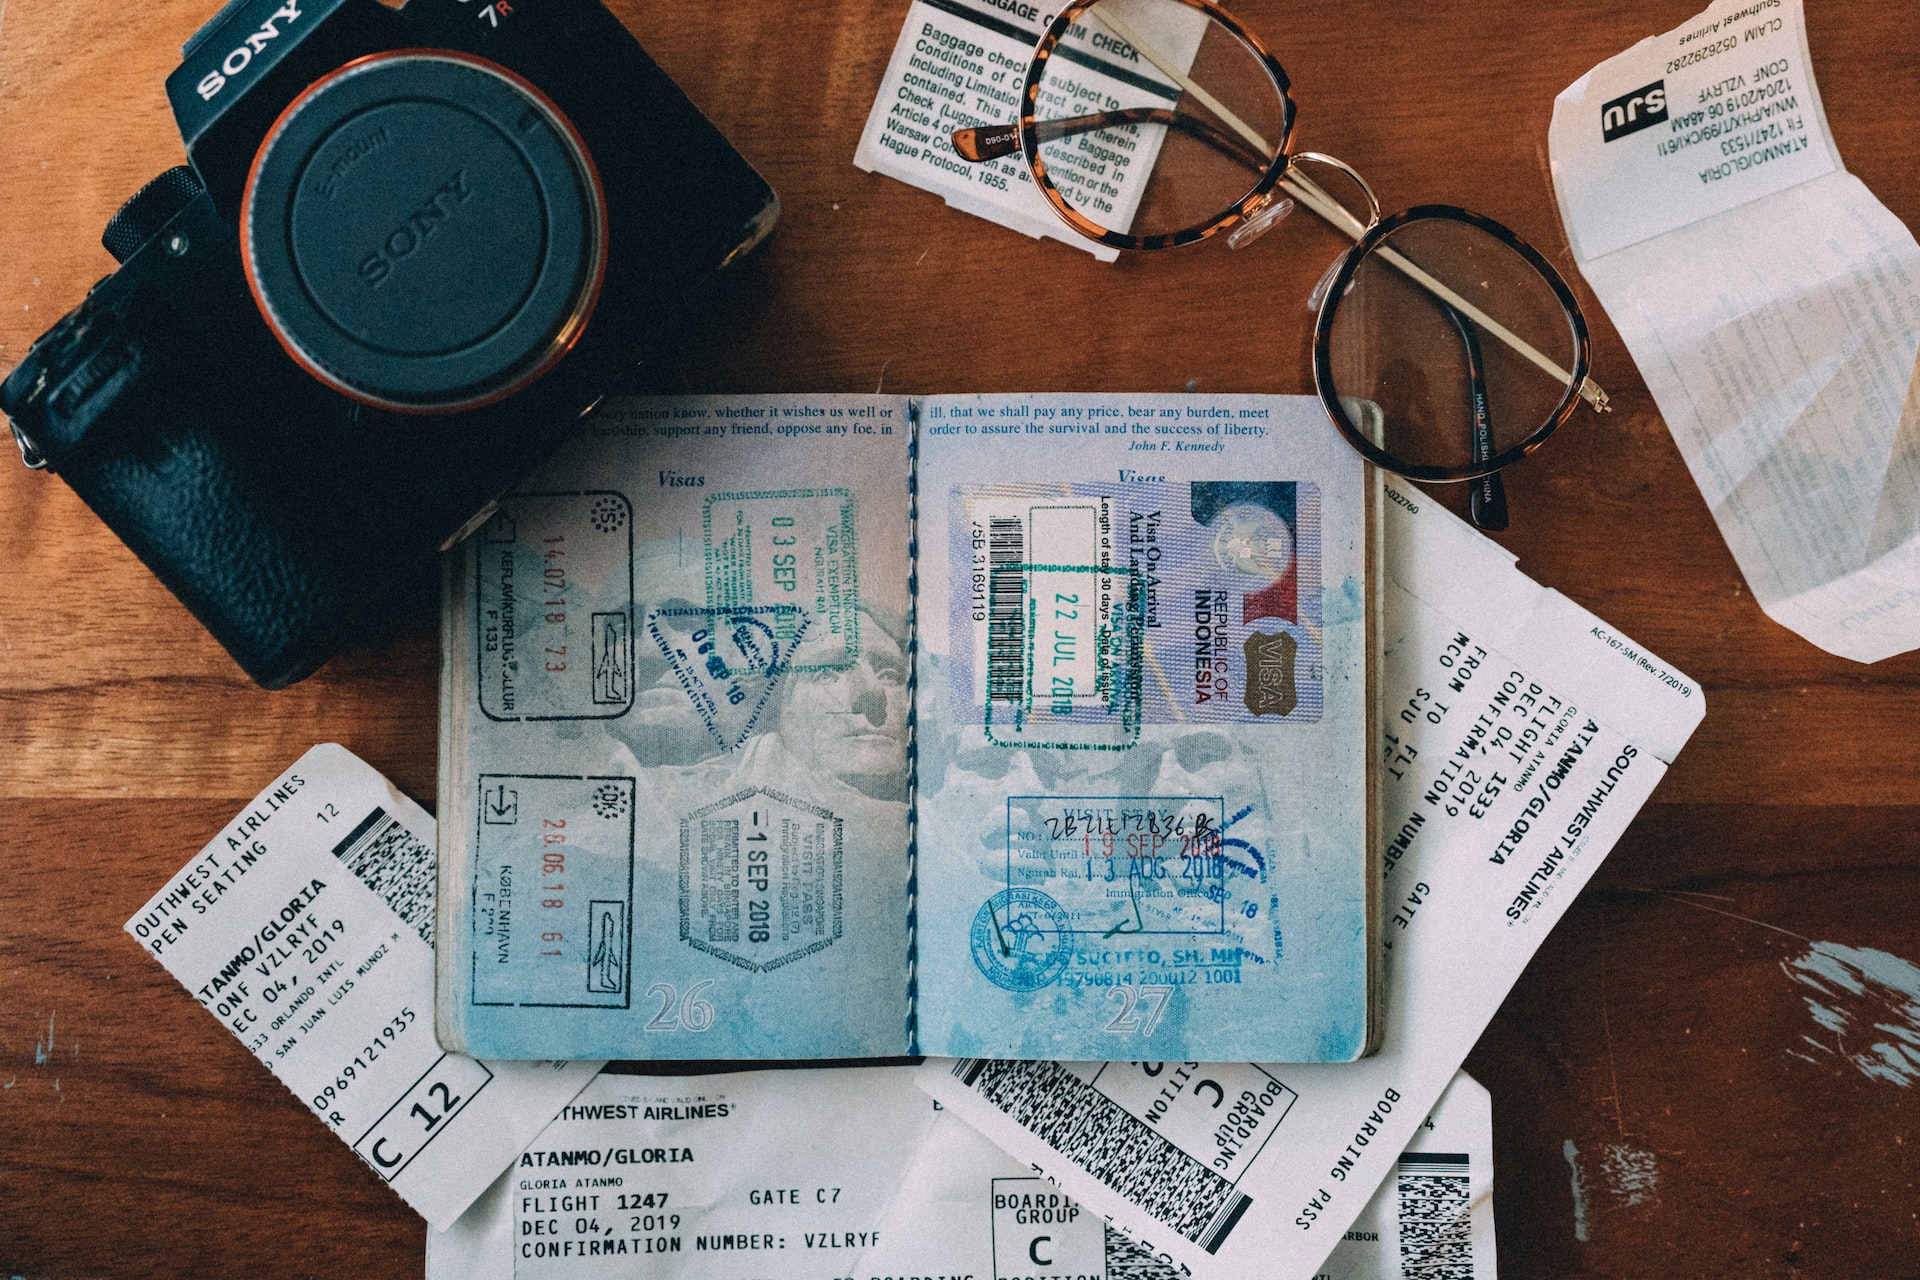 Items including an open passport and a camera arrayed on a wooden desk.